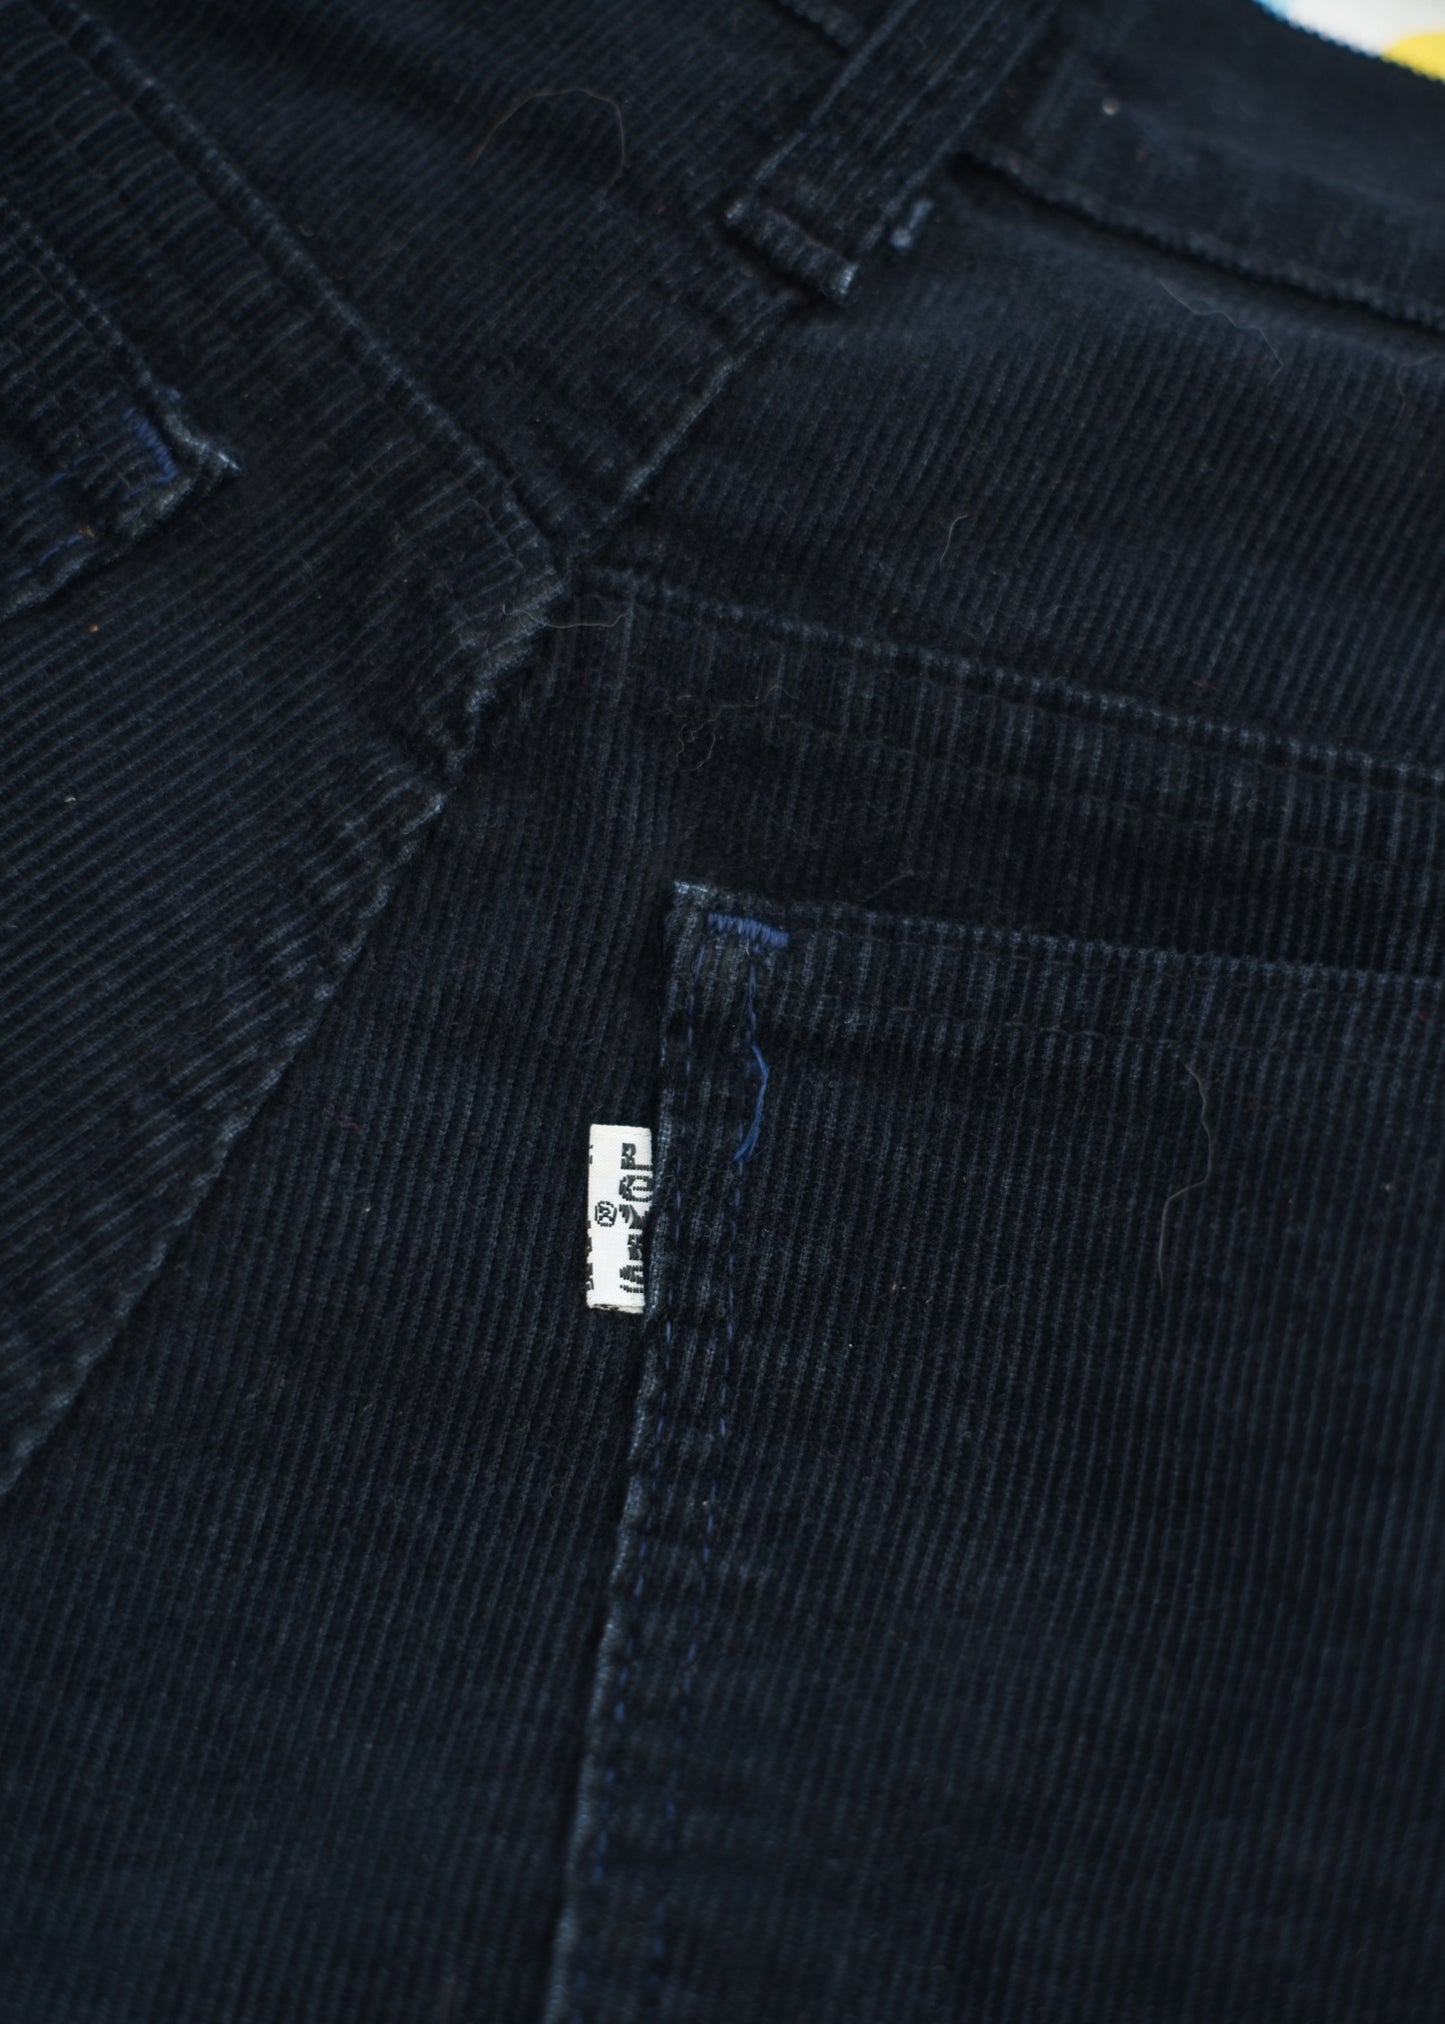 1970s Black Levis Corduroy Flared Jeans • White Tab